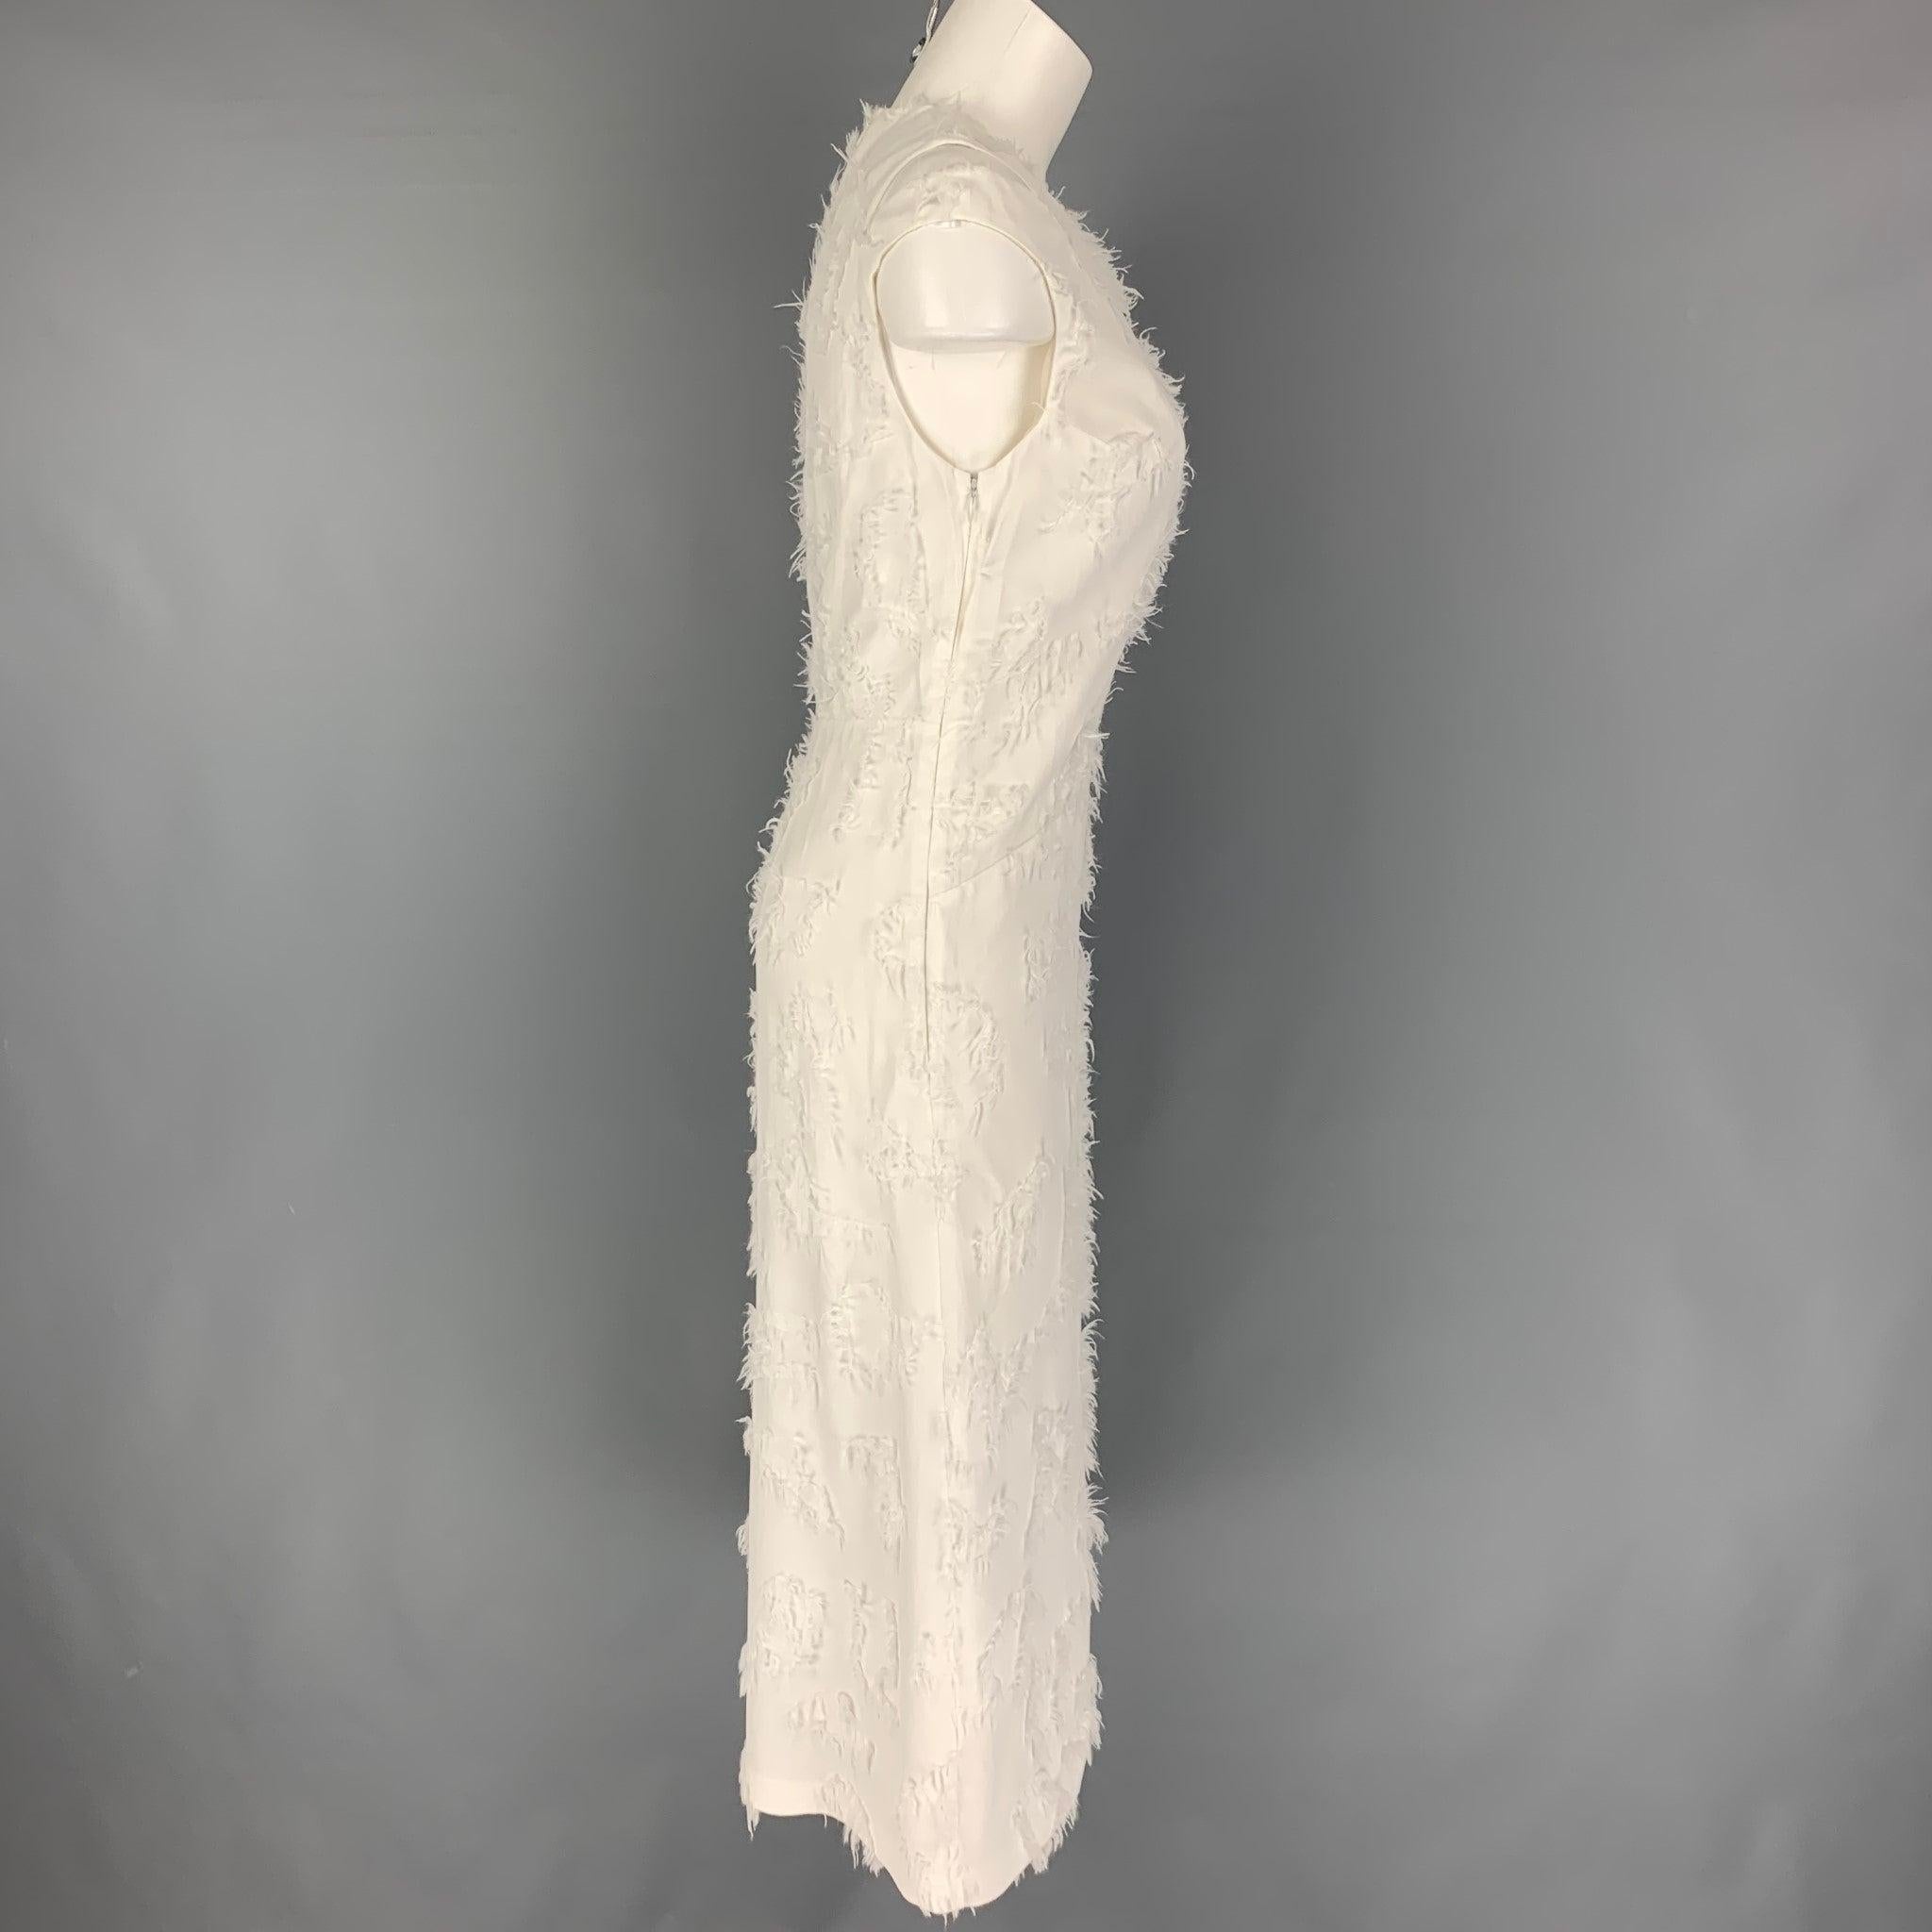 JIL SANDER dress comes in a white textured viscose featuring cut-out details, sleeveless, and a zip up closure. Made in Italy.
Very Good
Pre-Owned Condition. 

Marked:   34 

Measurements: 
 
Shoulder: 13 inches  Bust:
30 inches  Waist: 28 inches 